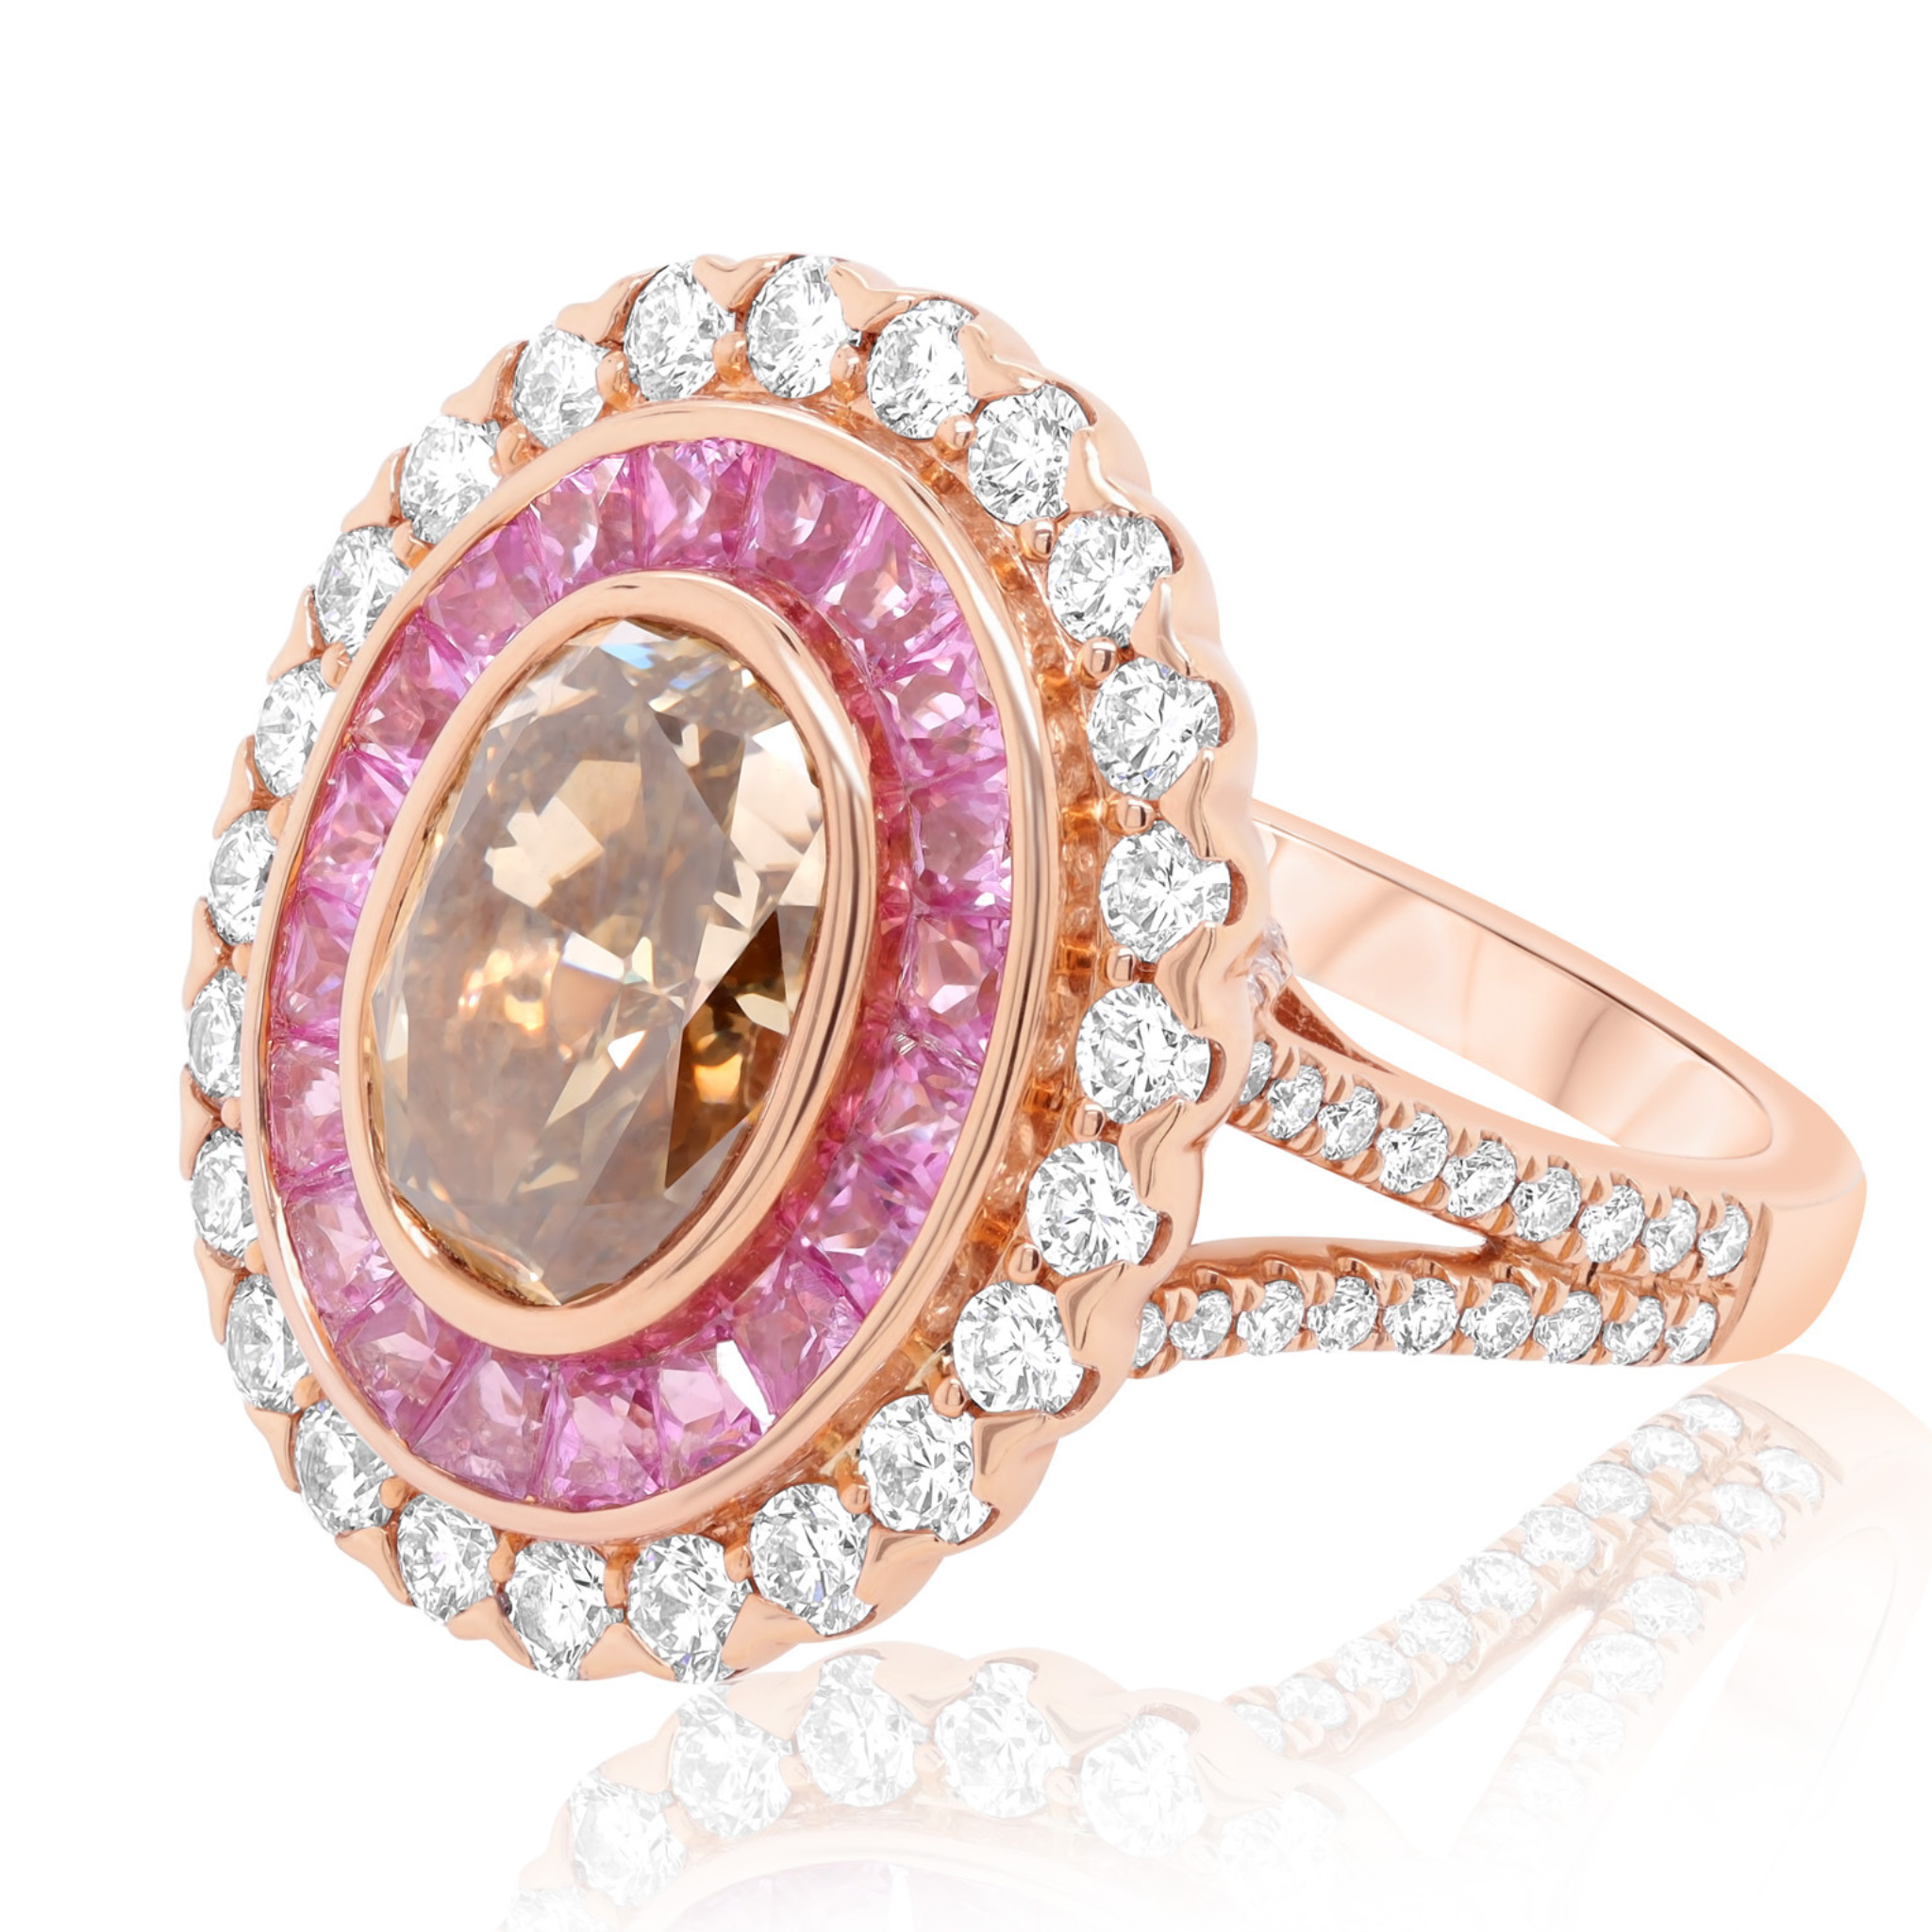 3.31ct Oval Brown and Pink Diamond Ring.jpg